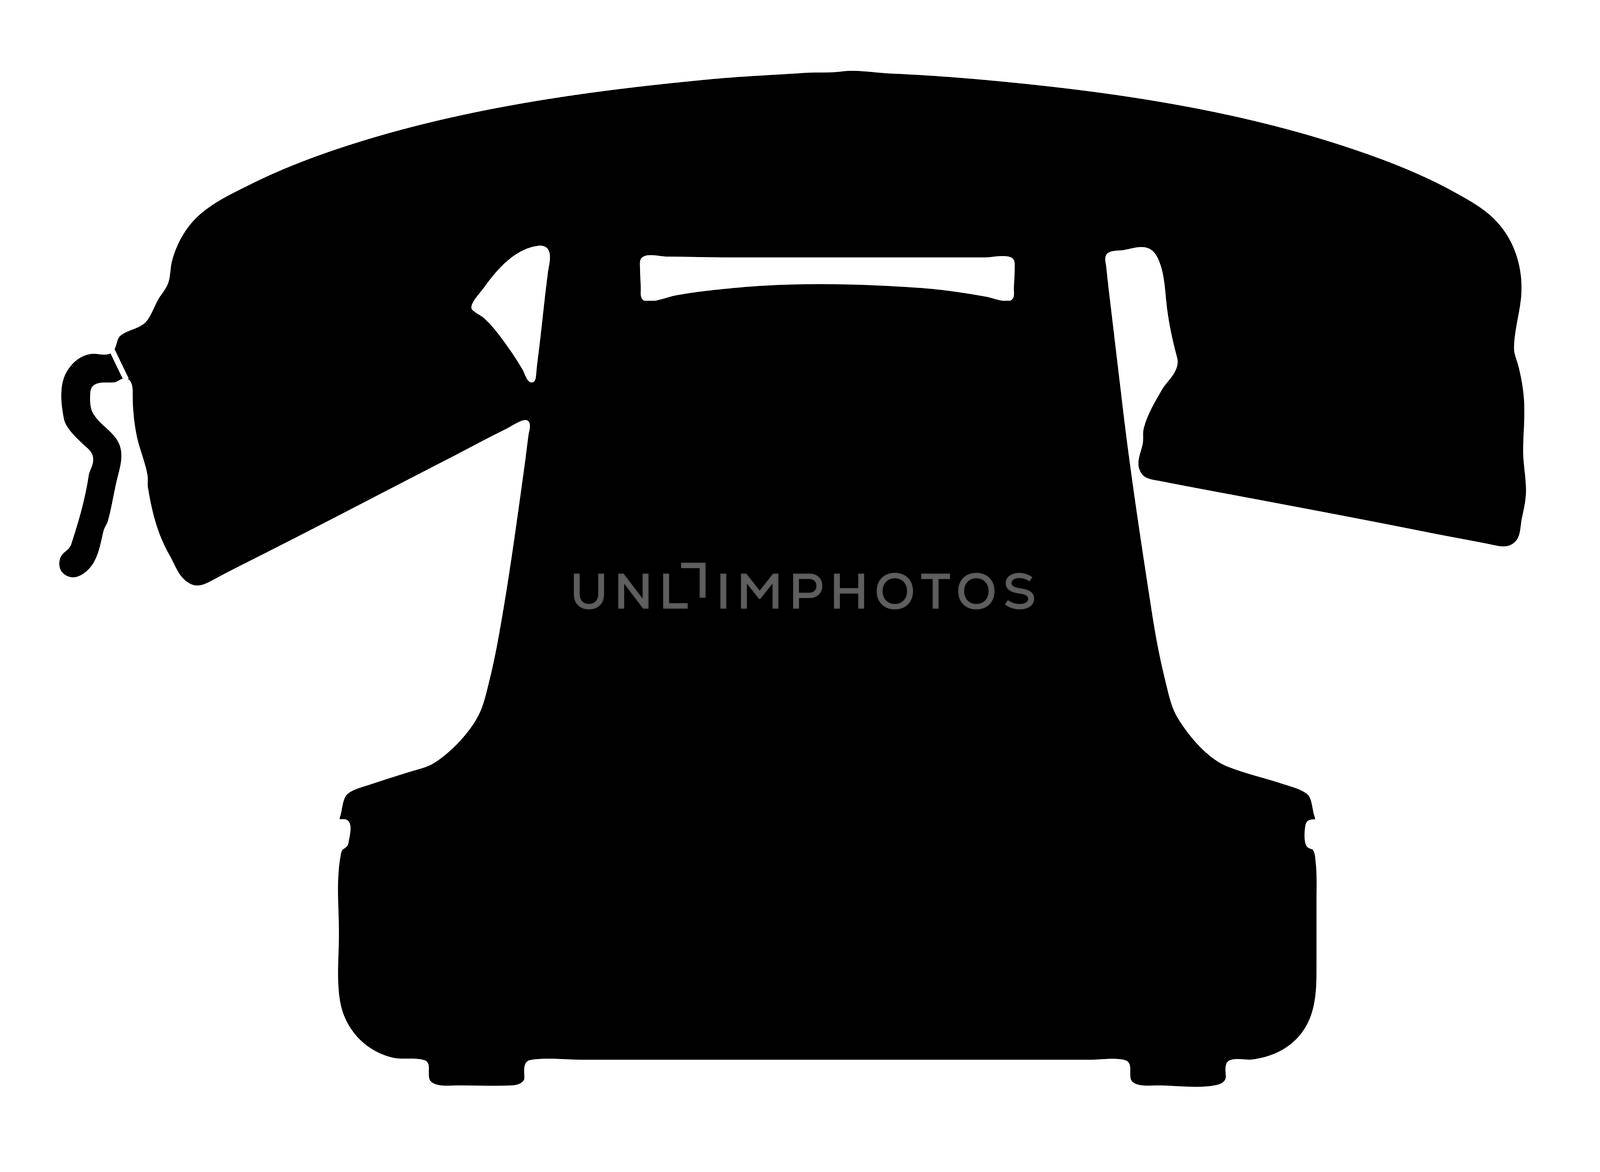 Silhouette of an old fashioned typical hot line telephone